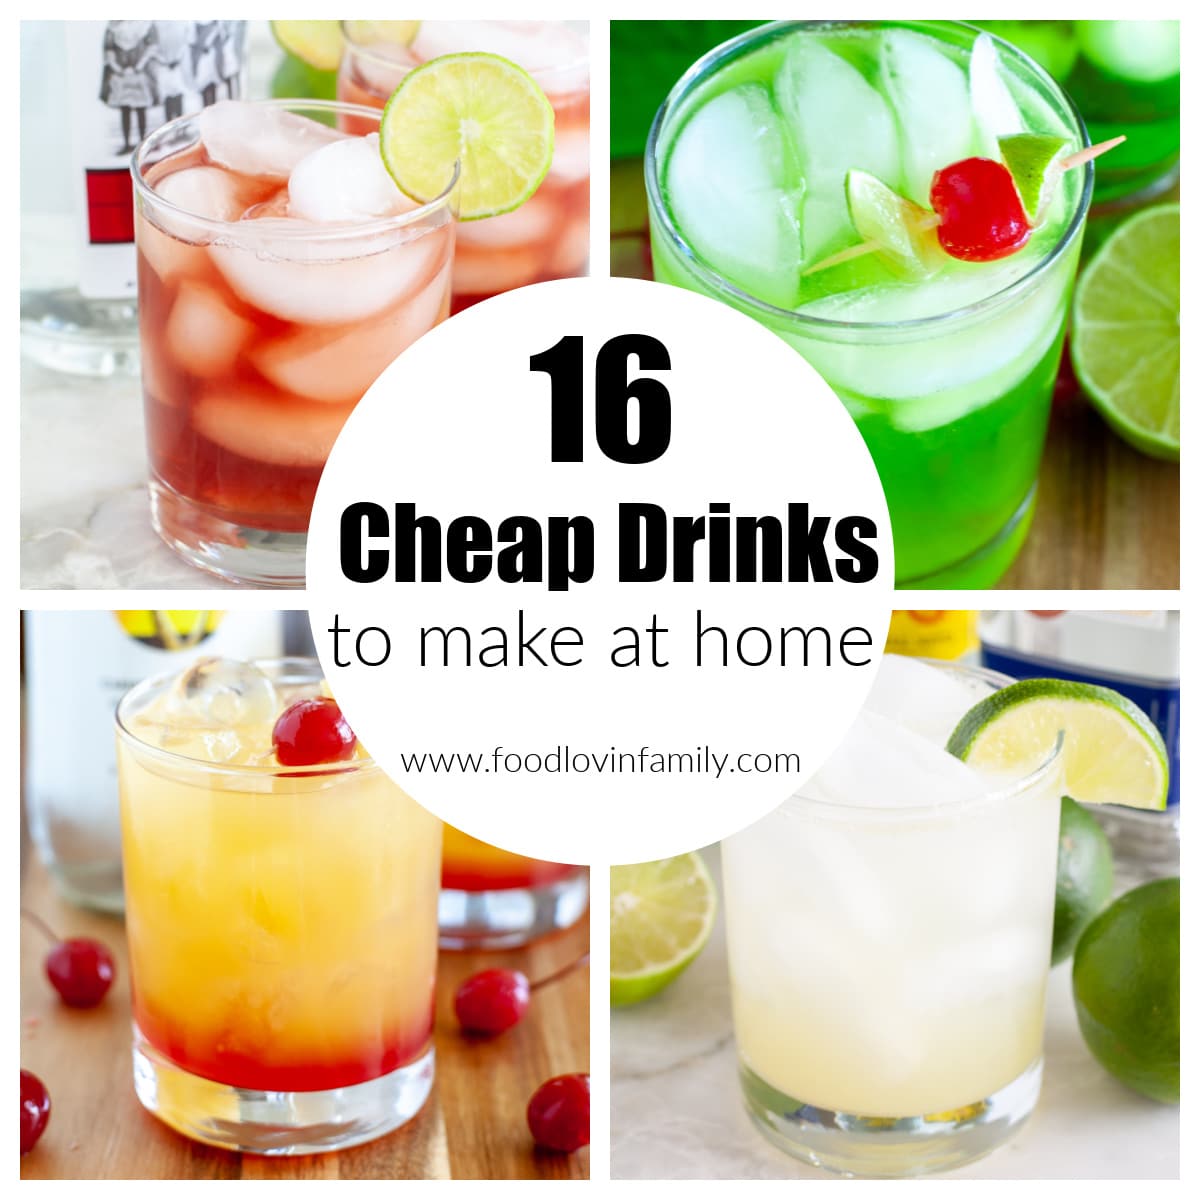 Budget-friendly beverage offers